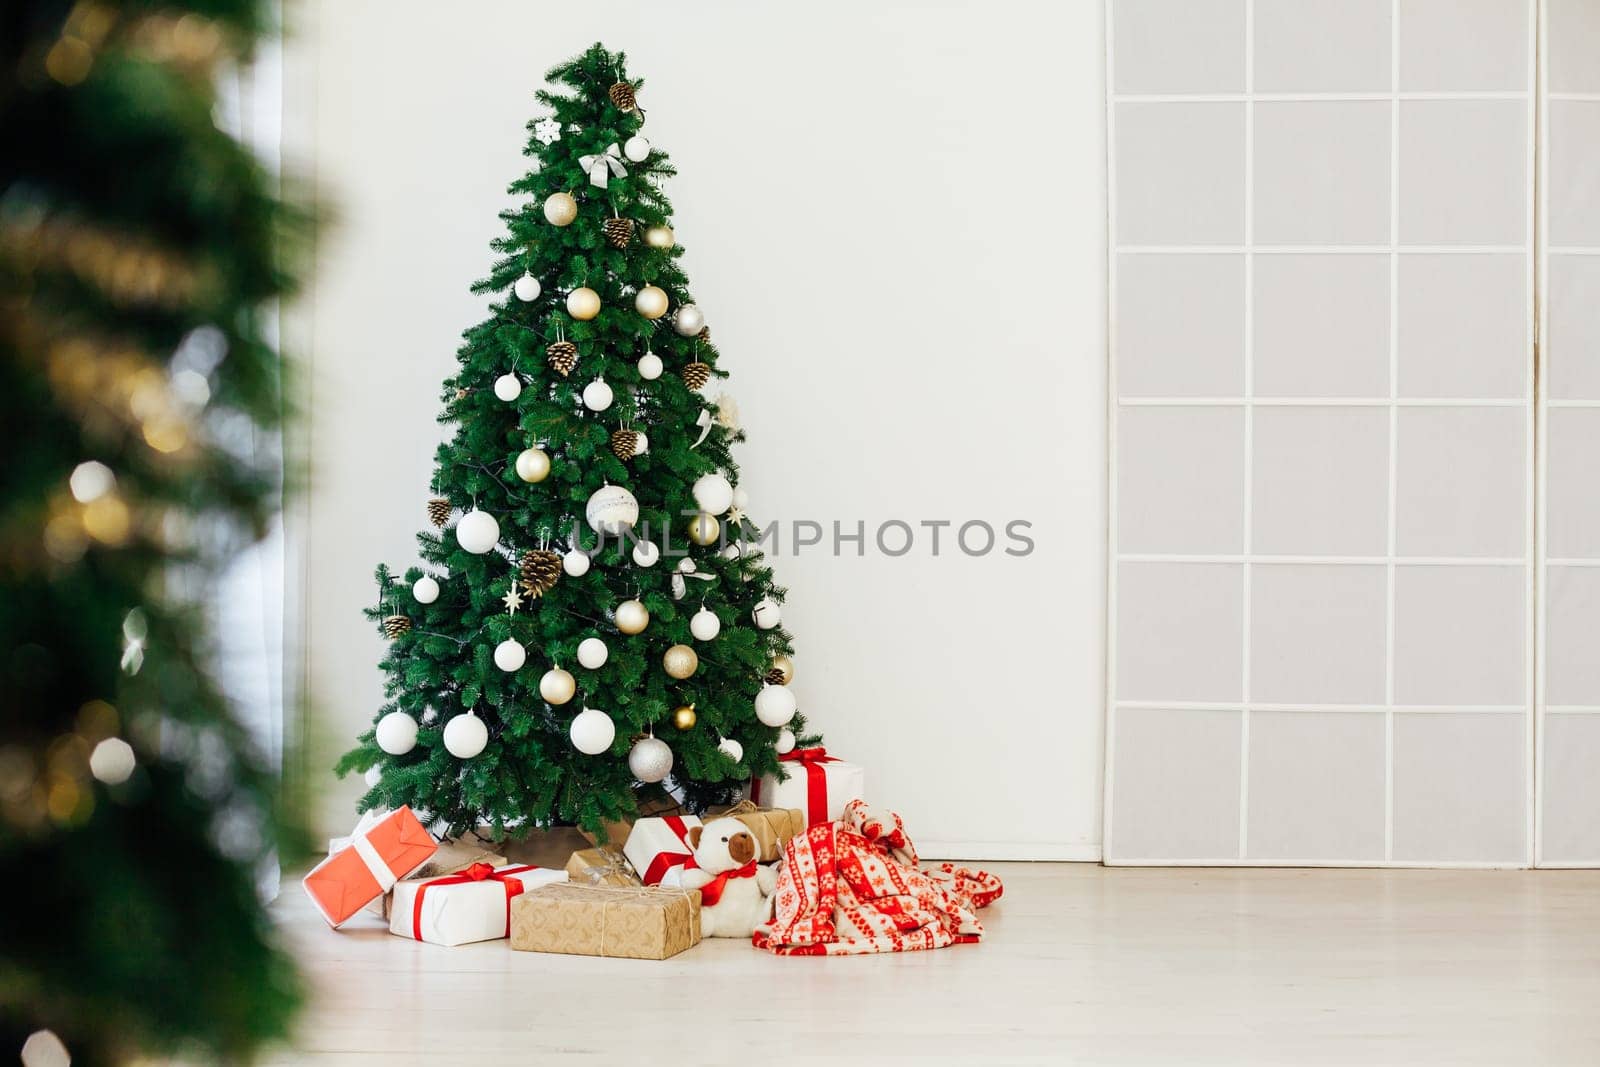 Christmas tree with gifts holiday new year interior decor as background by Simakov